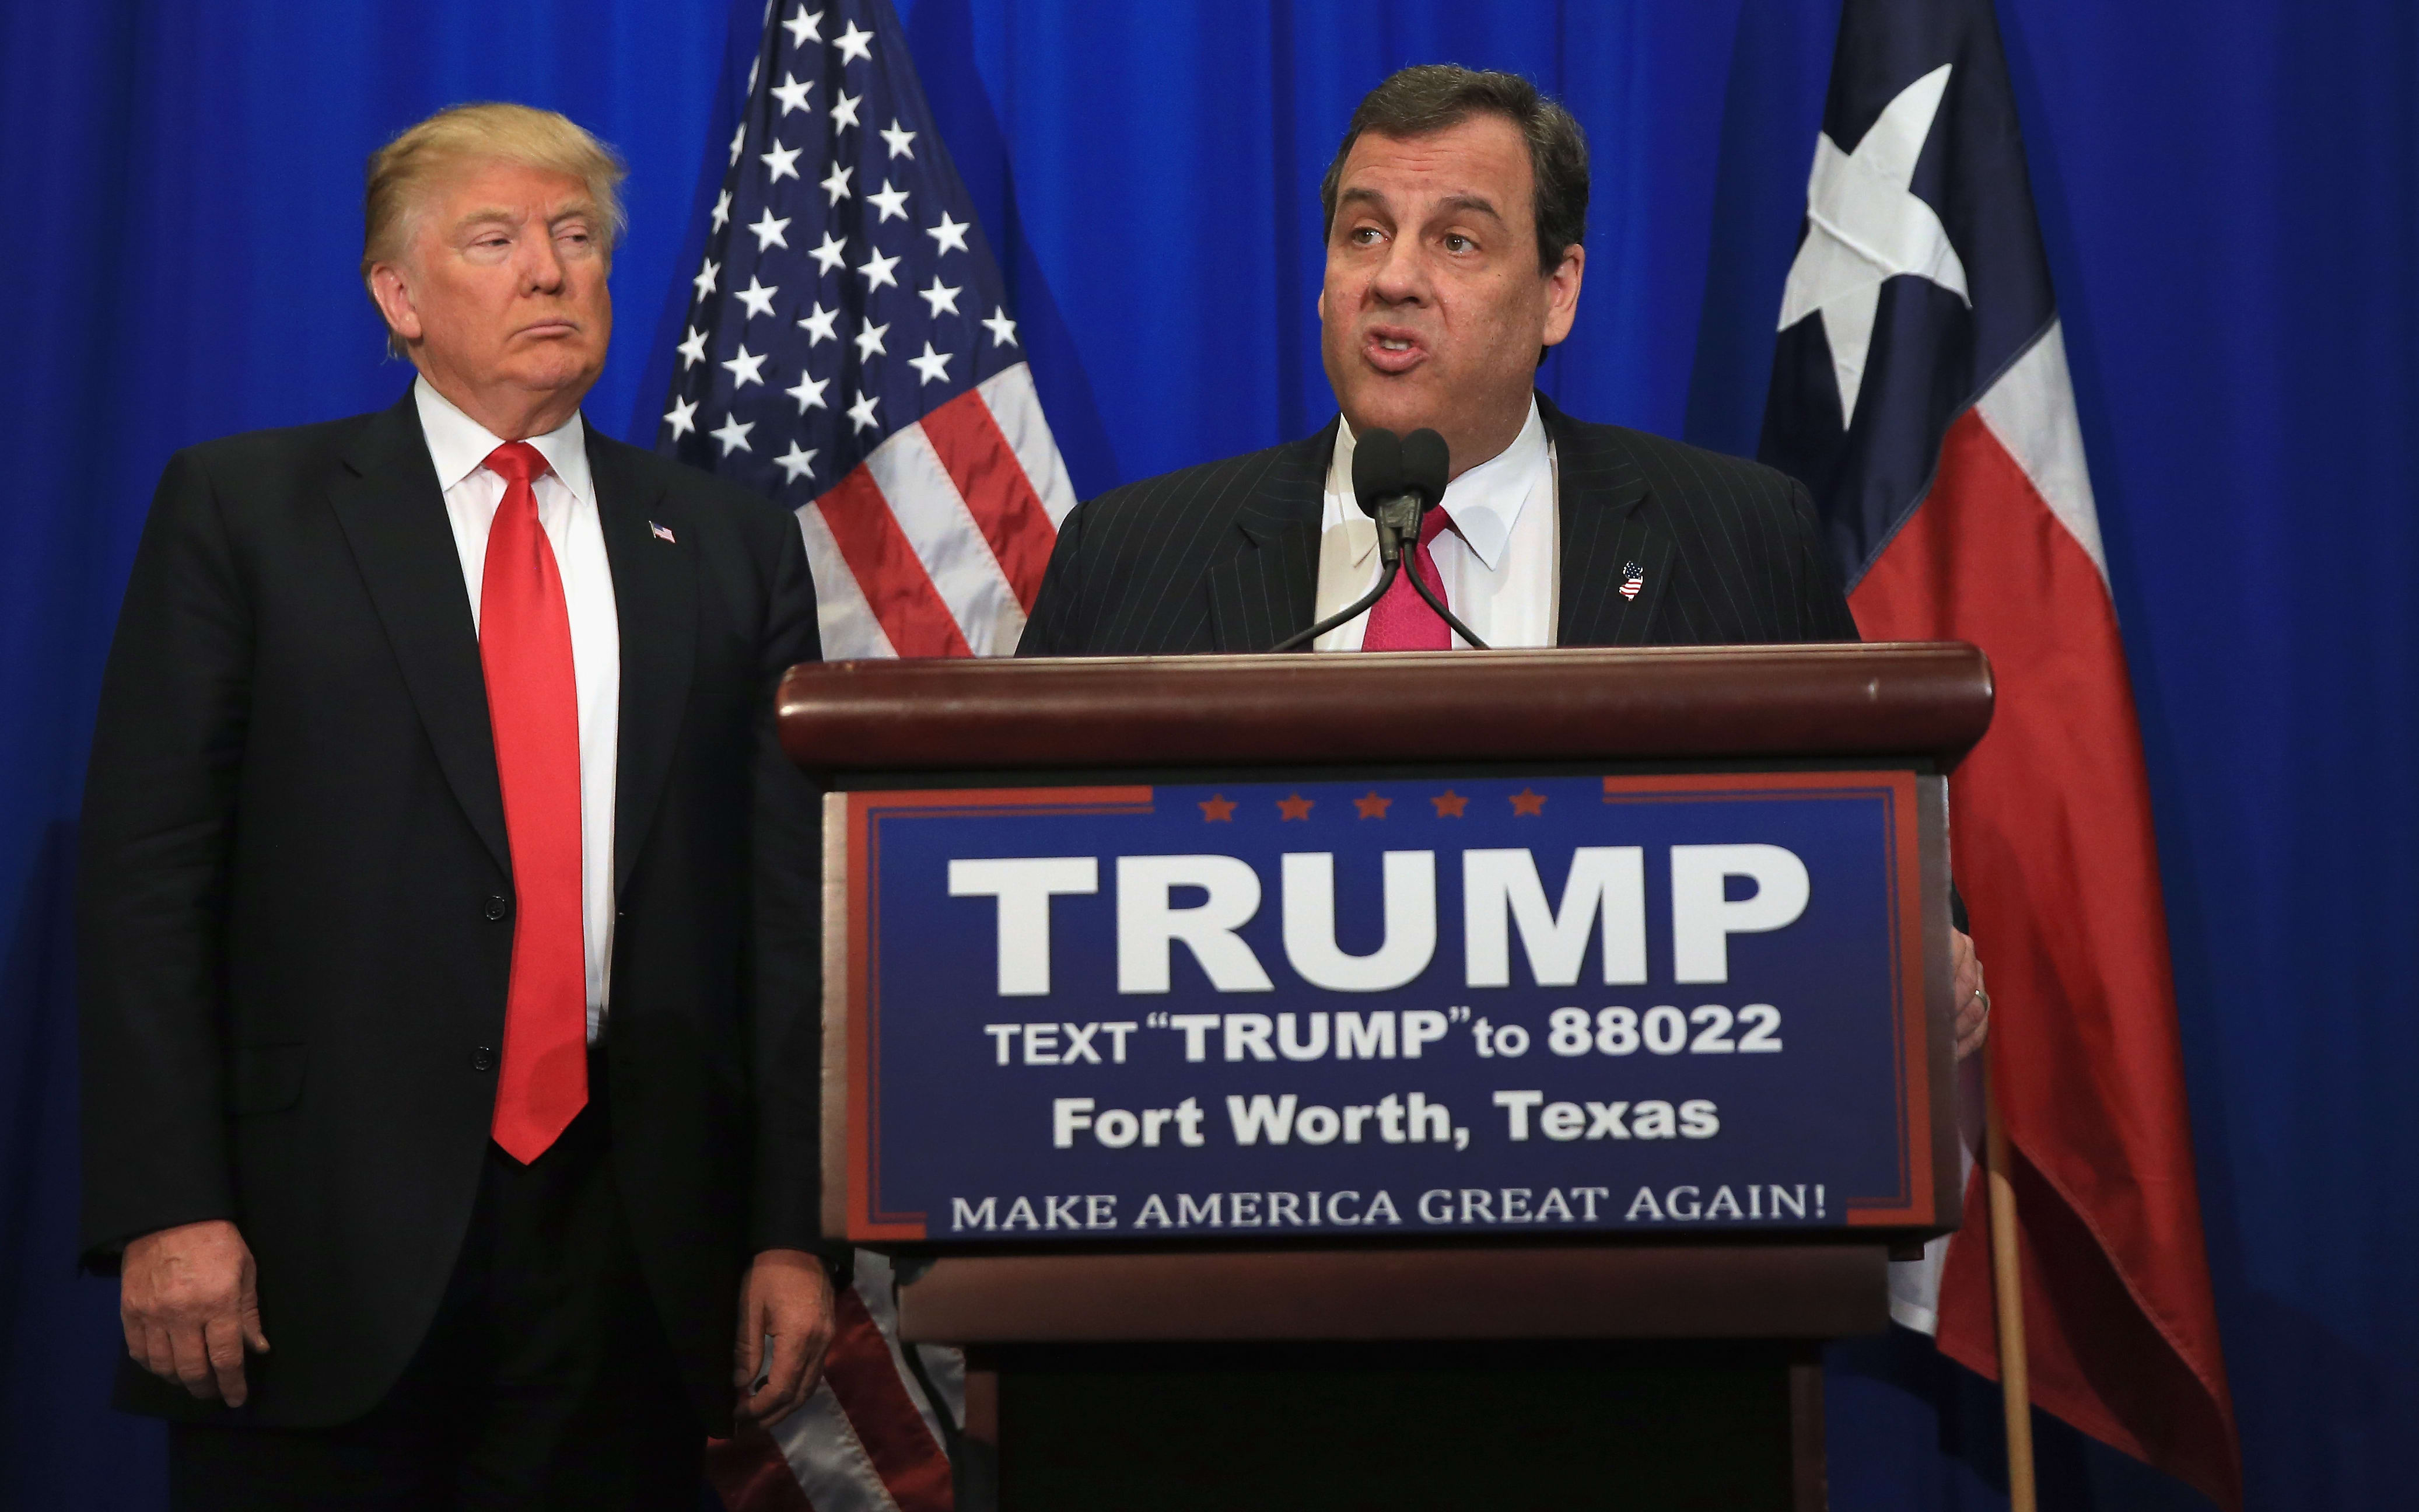 A file photo shows Donald Trump, right, and Chris Christie during a break in the Republican Presidential Candidates' Debate in Manchester, New Hampshire, on 6 February 2016.